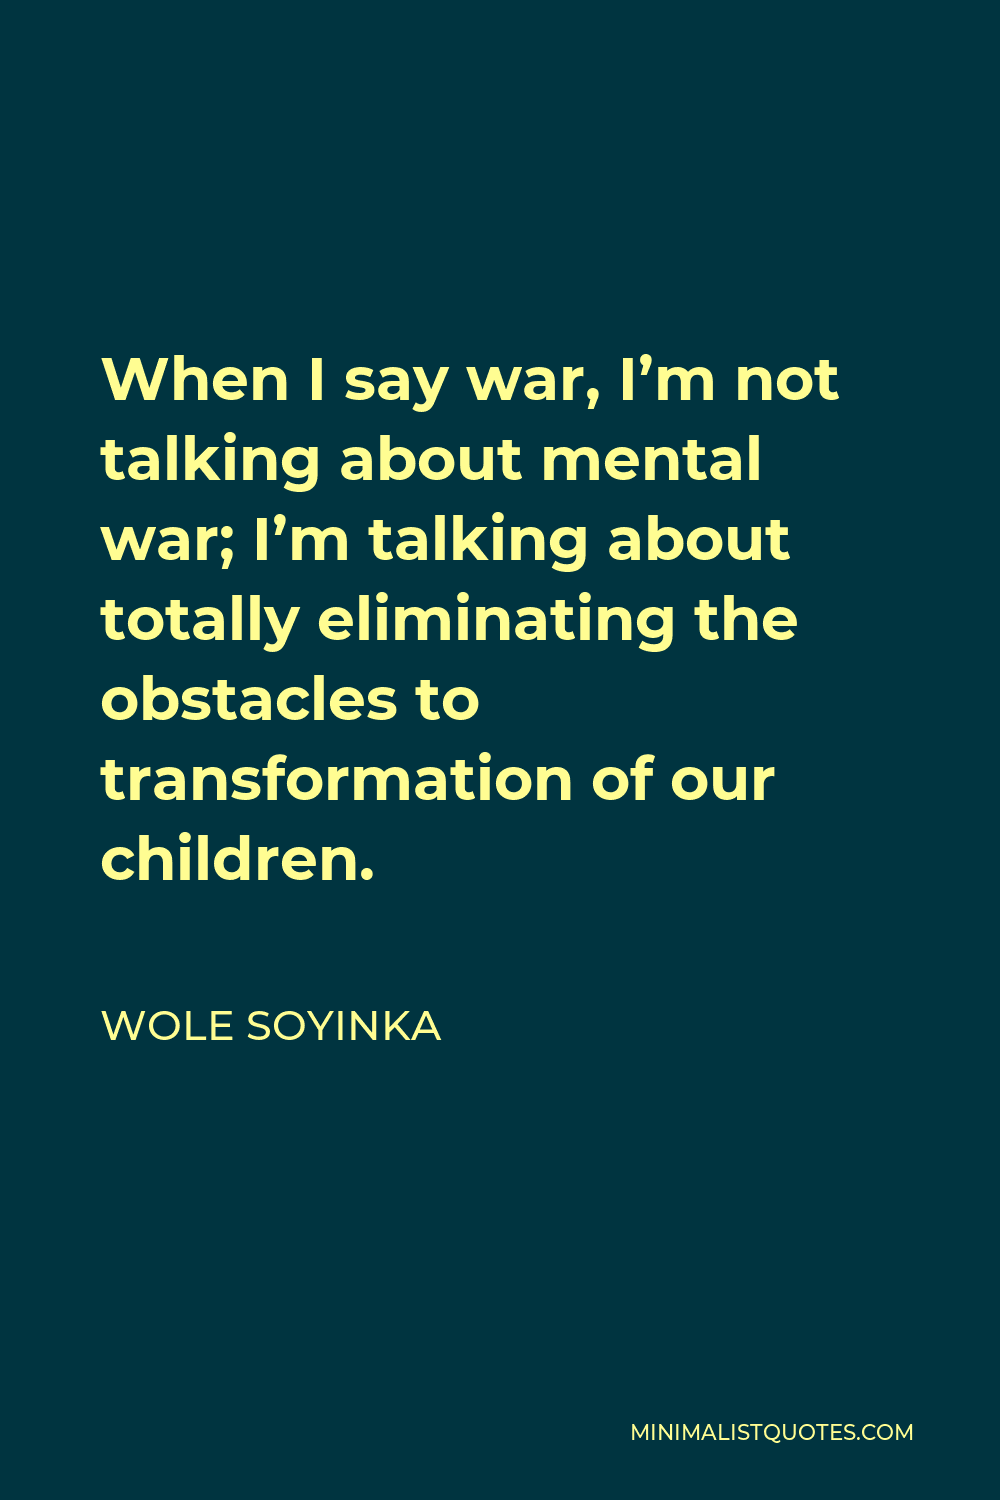 Wole Soyinka Quote - When I say war, I’m not talking about mental war; I’m talking about totally eliminating the obstacles to transformation of our children.